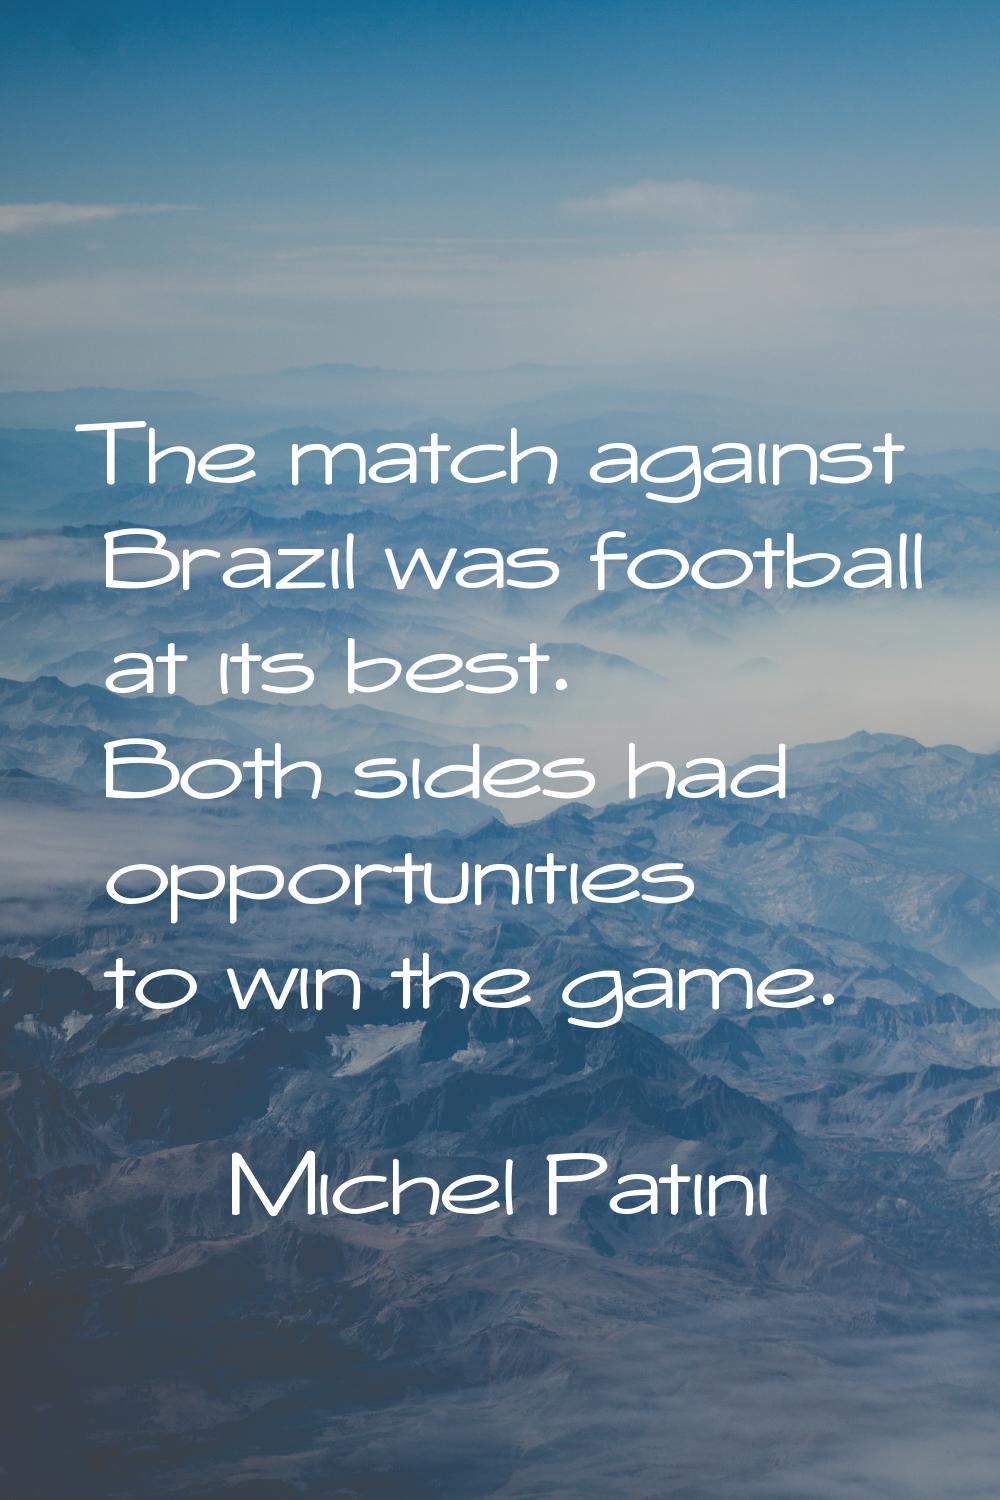 The match against Brazil was football at its best. Both sides had opportunities to win the game.